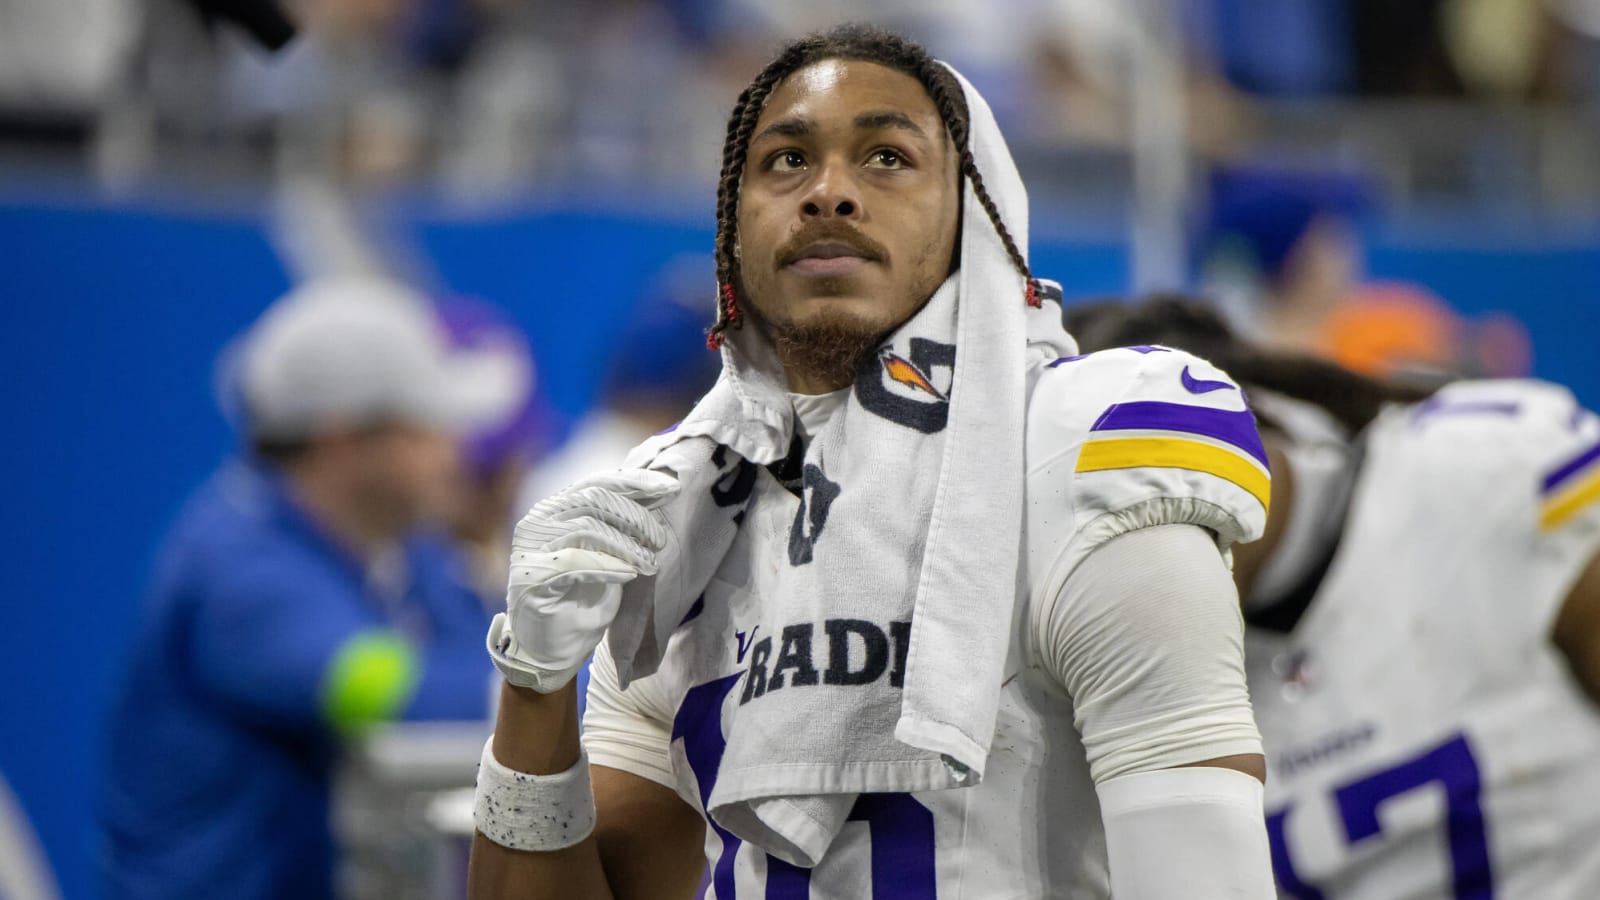 Vikings’ Coach Gives Major Update On Justin Jefferson Contract Talks